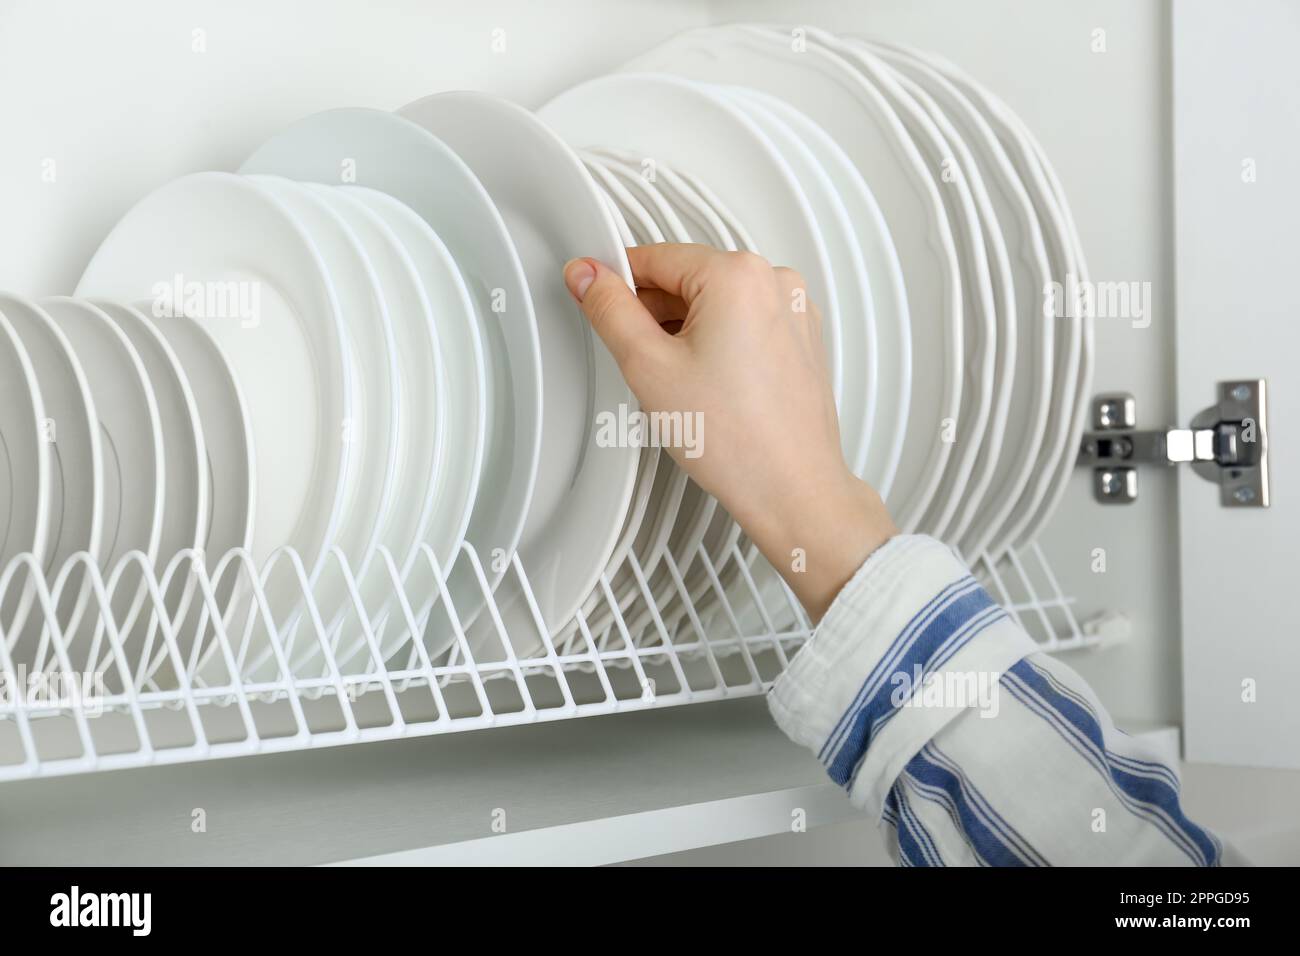 Woman taking ceramic plate from drying rack, closeup Stock Photo